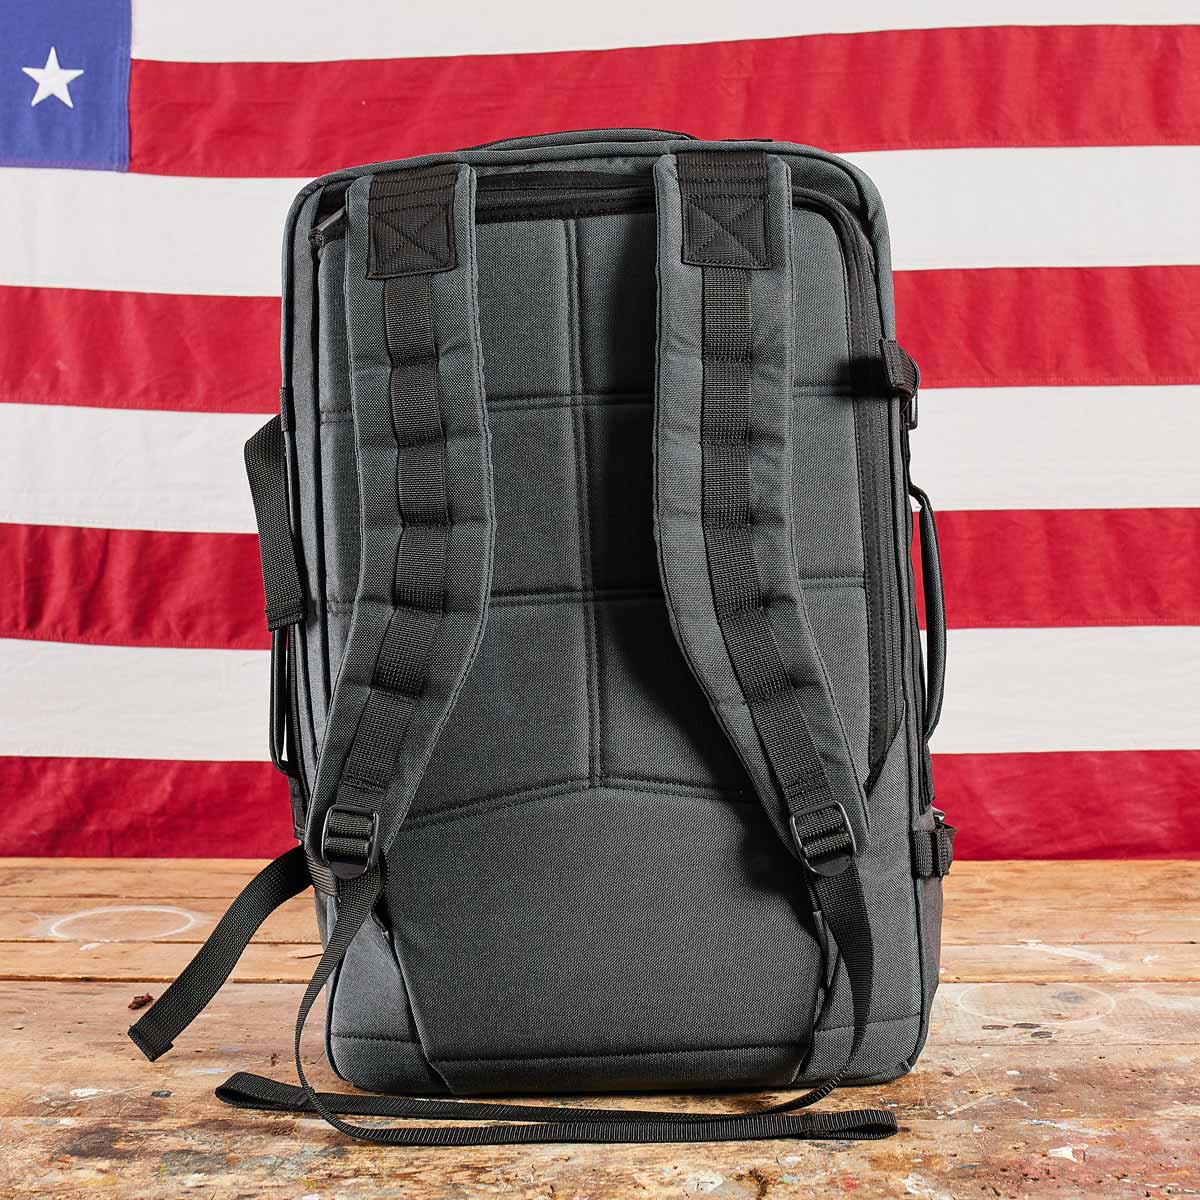 Goruck GR3 Backpack | The Coolector